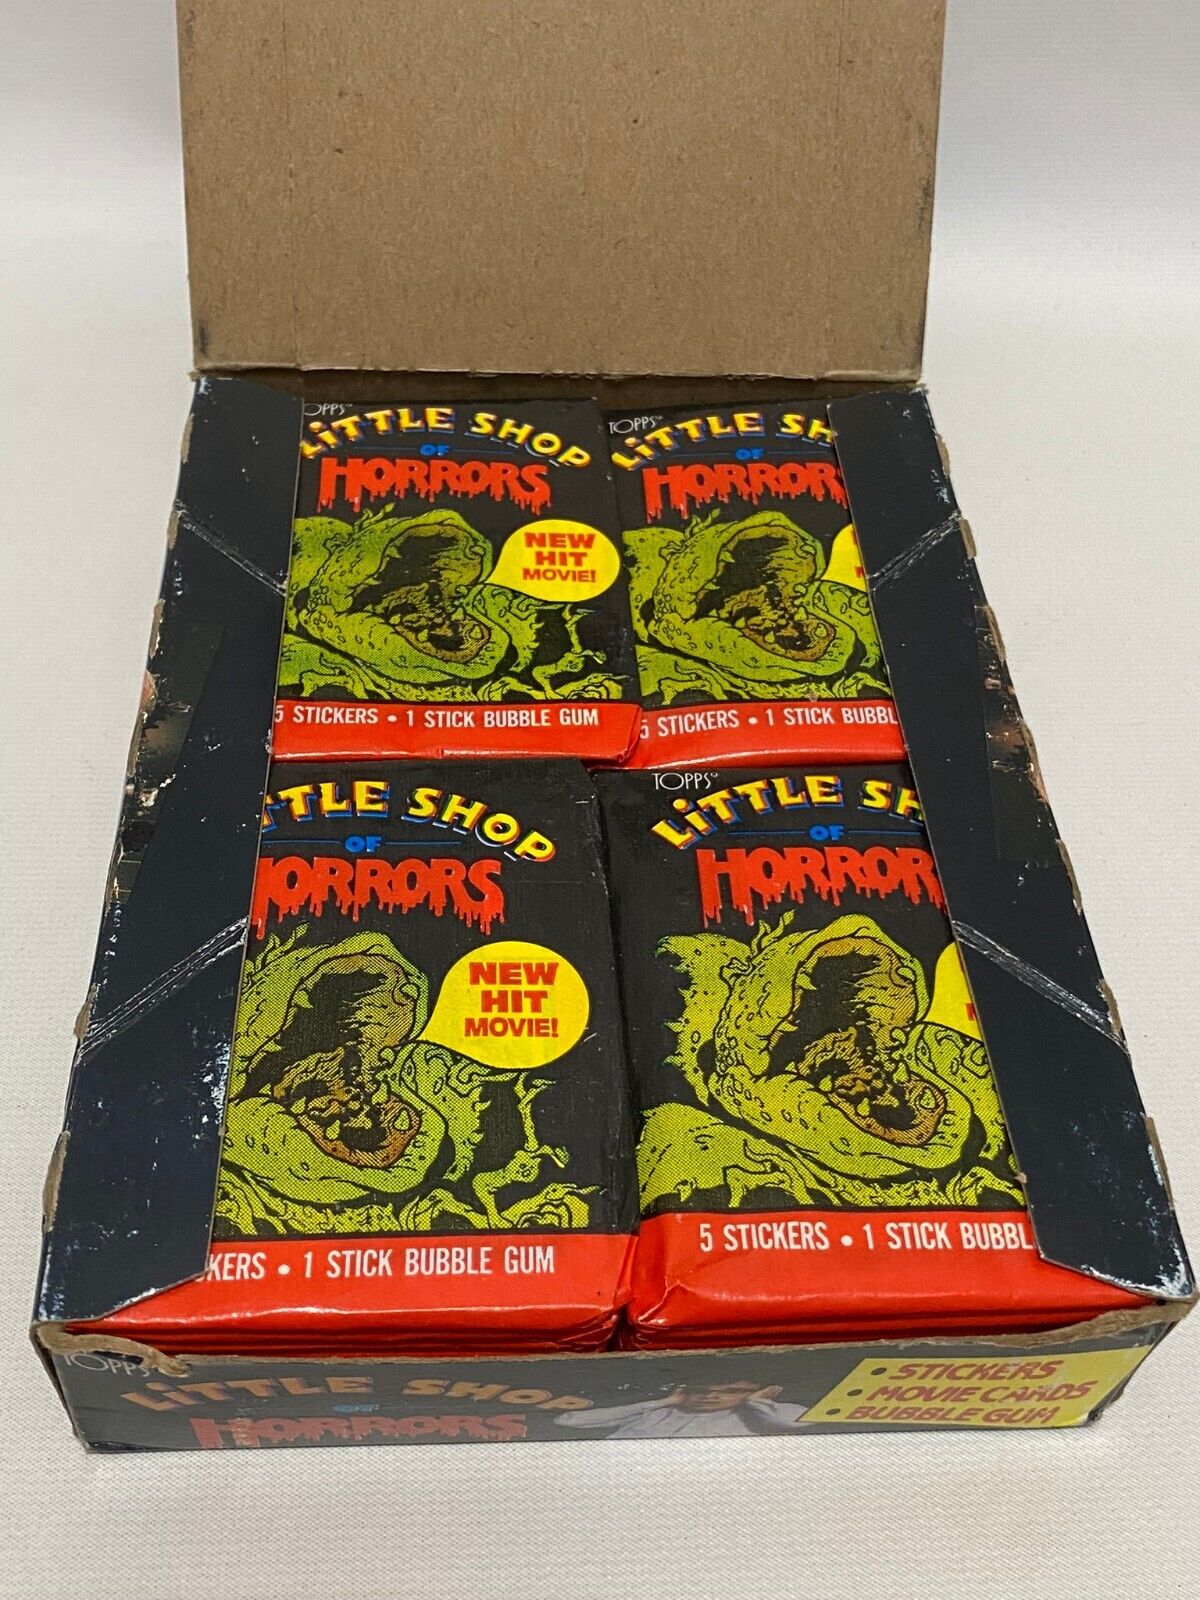 1986 Topps Little Shop Of Horrors Wax Box 36 Packs Stickers Cards Gum New